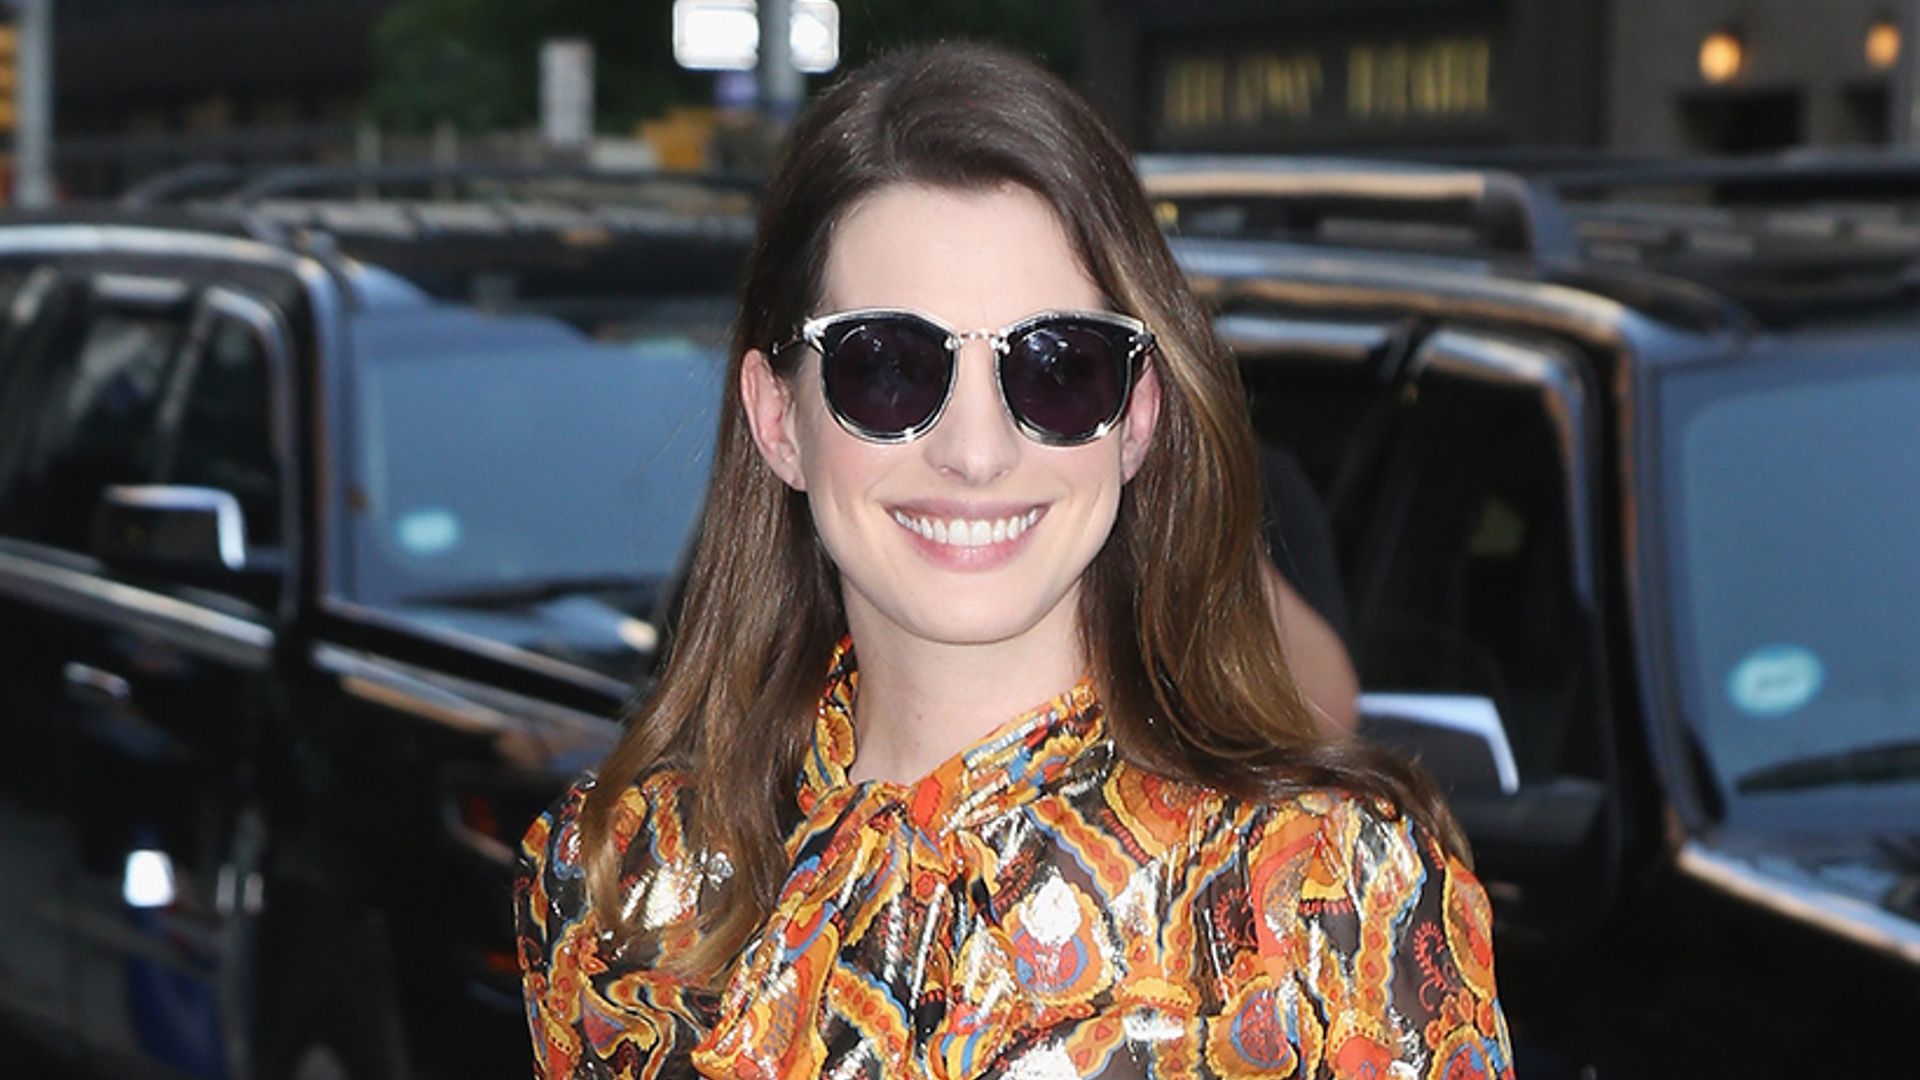 Anne Hathaway changed THREE times yesterday and she looked incredible